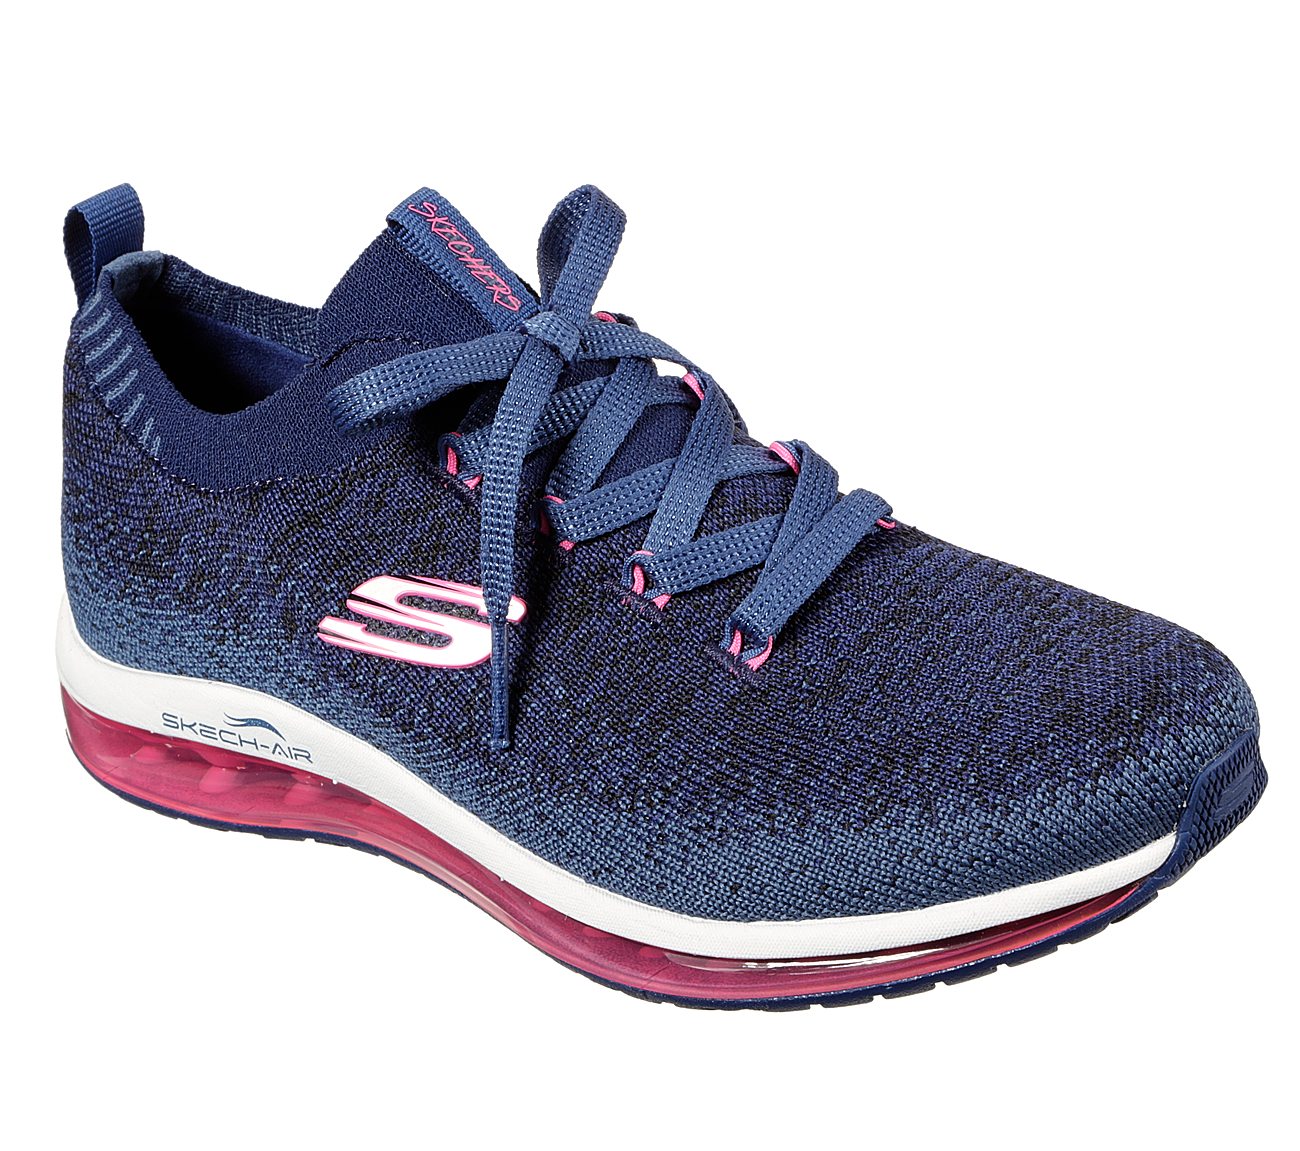 SKECH-AIR ELEMENT-BRISK MOTIO, NAVY/HOT PINK Footwear Lateral View